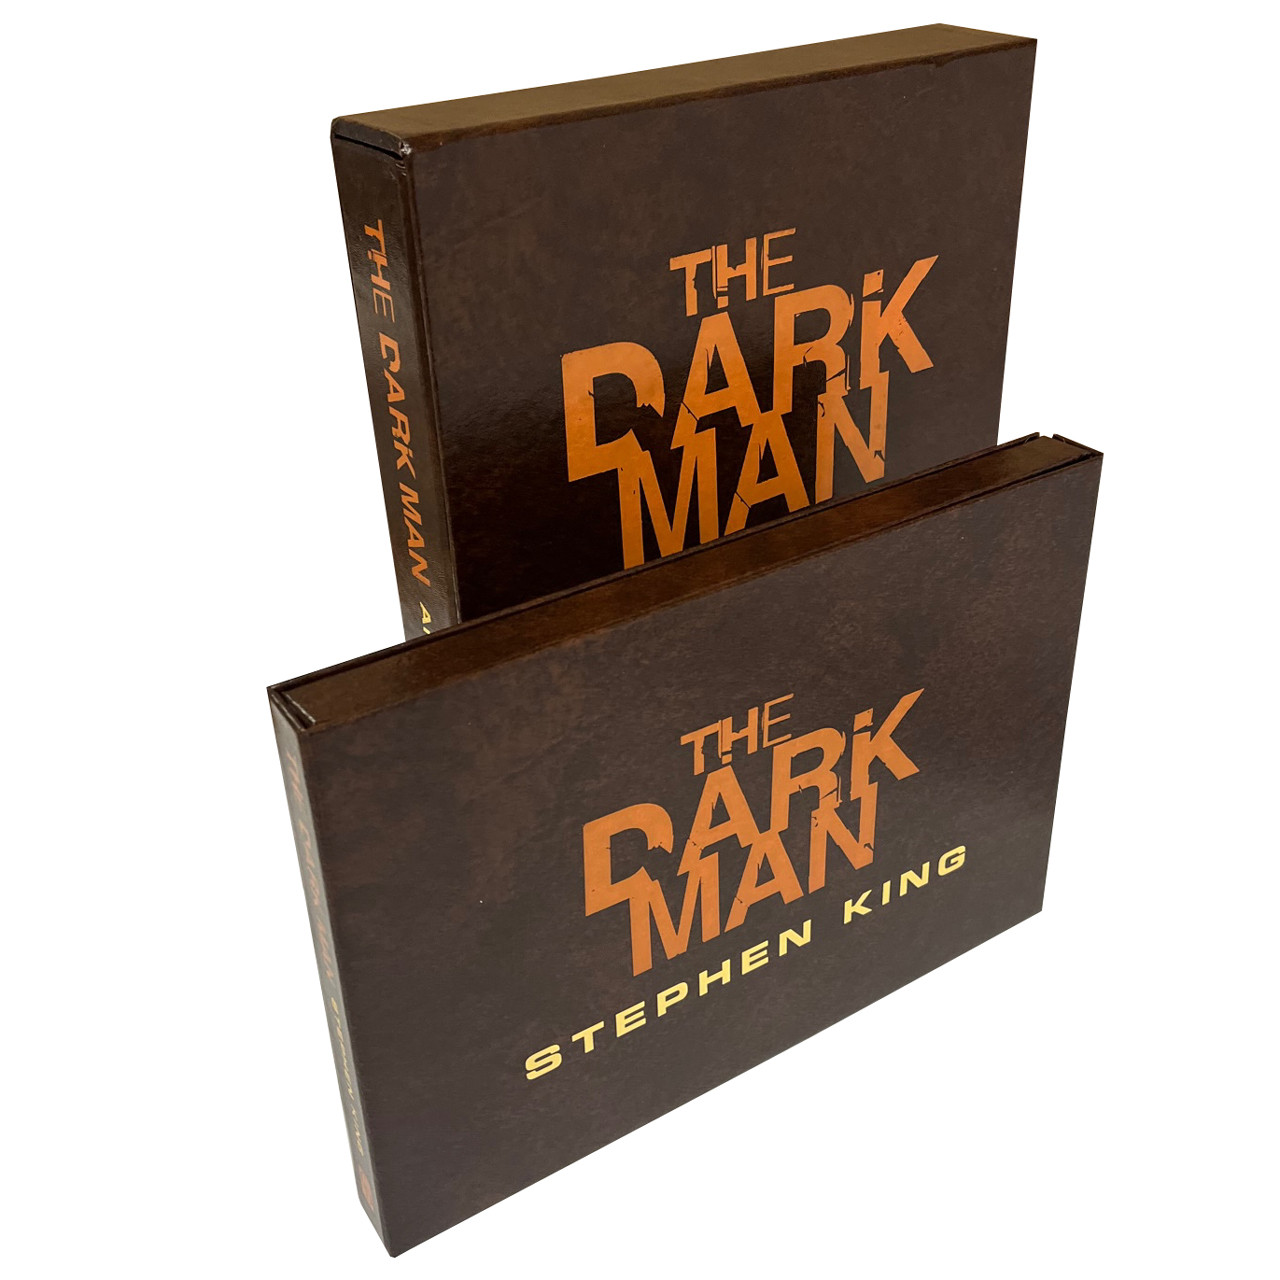 Stephen King, Glenn Chadbourne "The Dark Man" Tray-cased Signed Limited Edition No. 141 of 500 w/Matching Numbers Artwork Portfolio [Double-Remarqued]